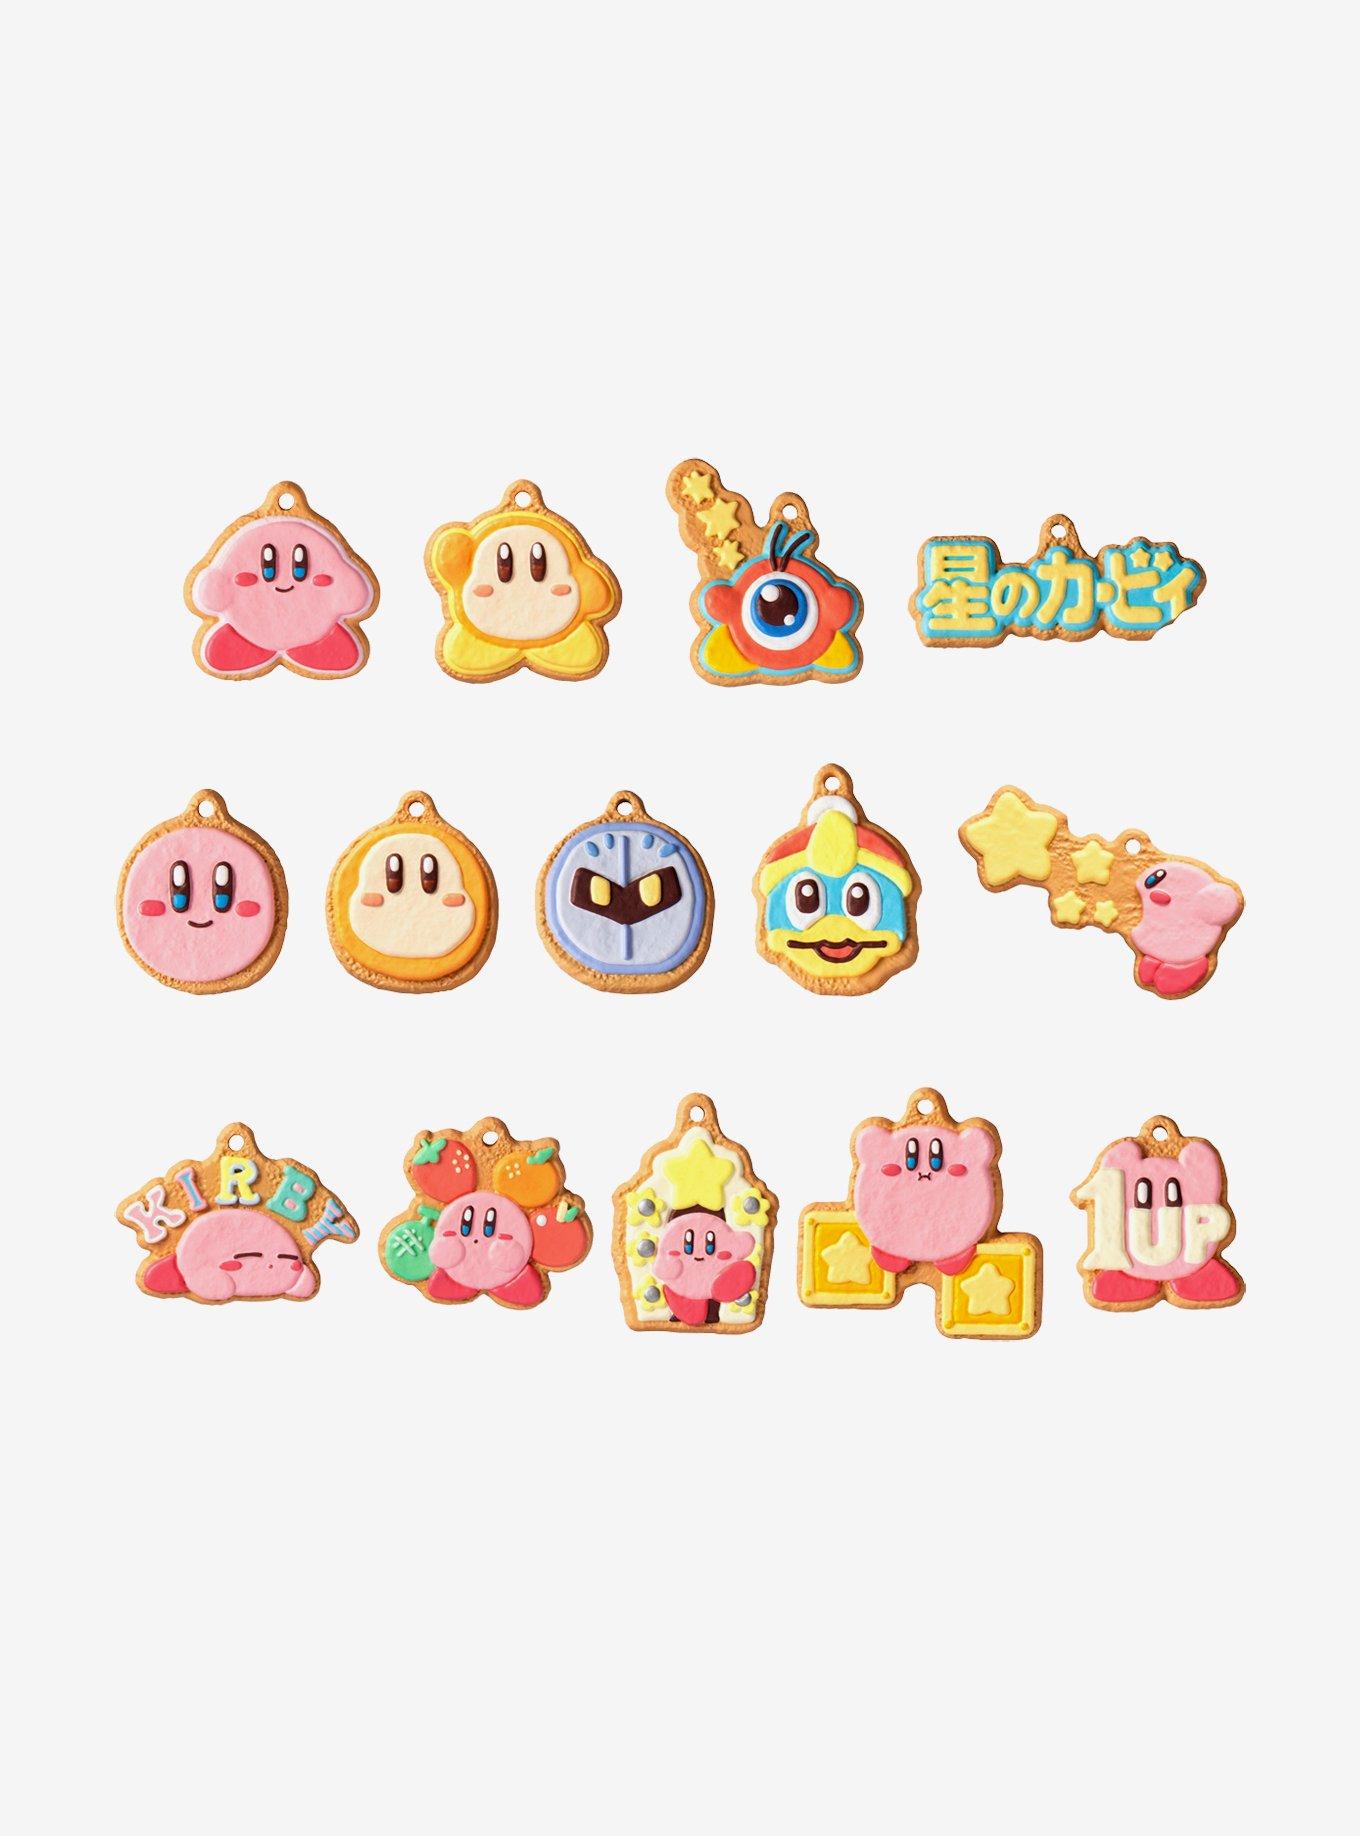 Kirby's Dream Collection Priced in Japan, Control Option Revealed